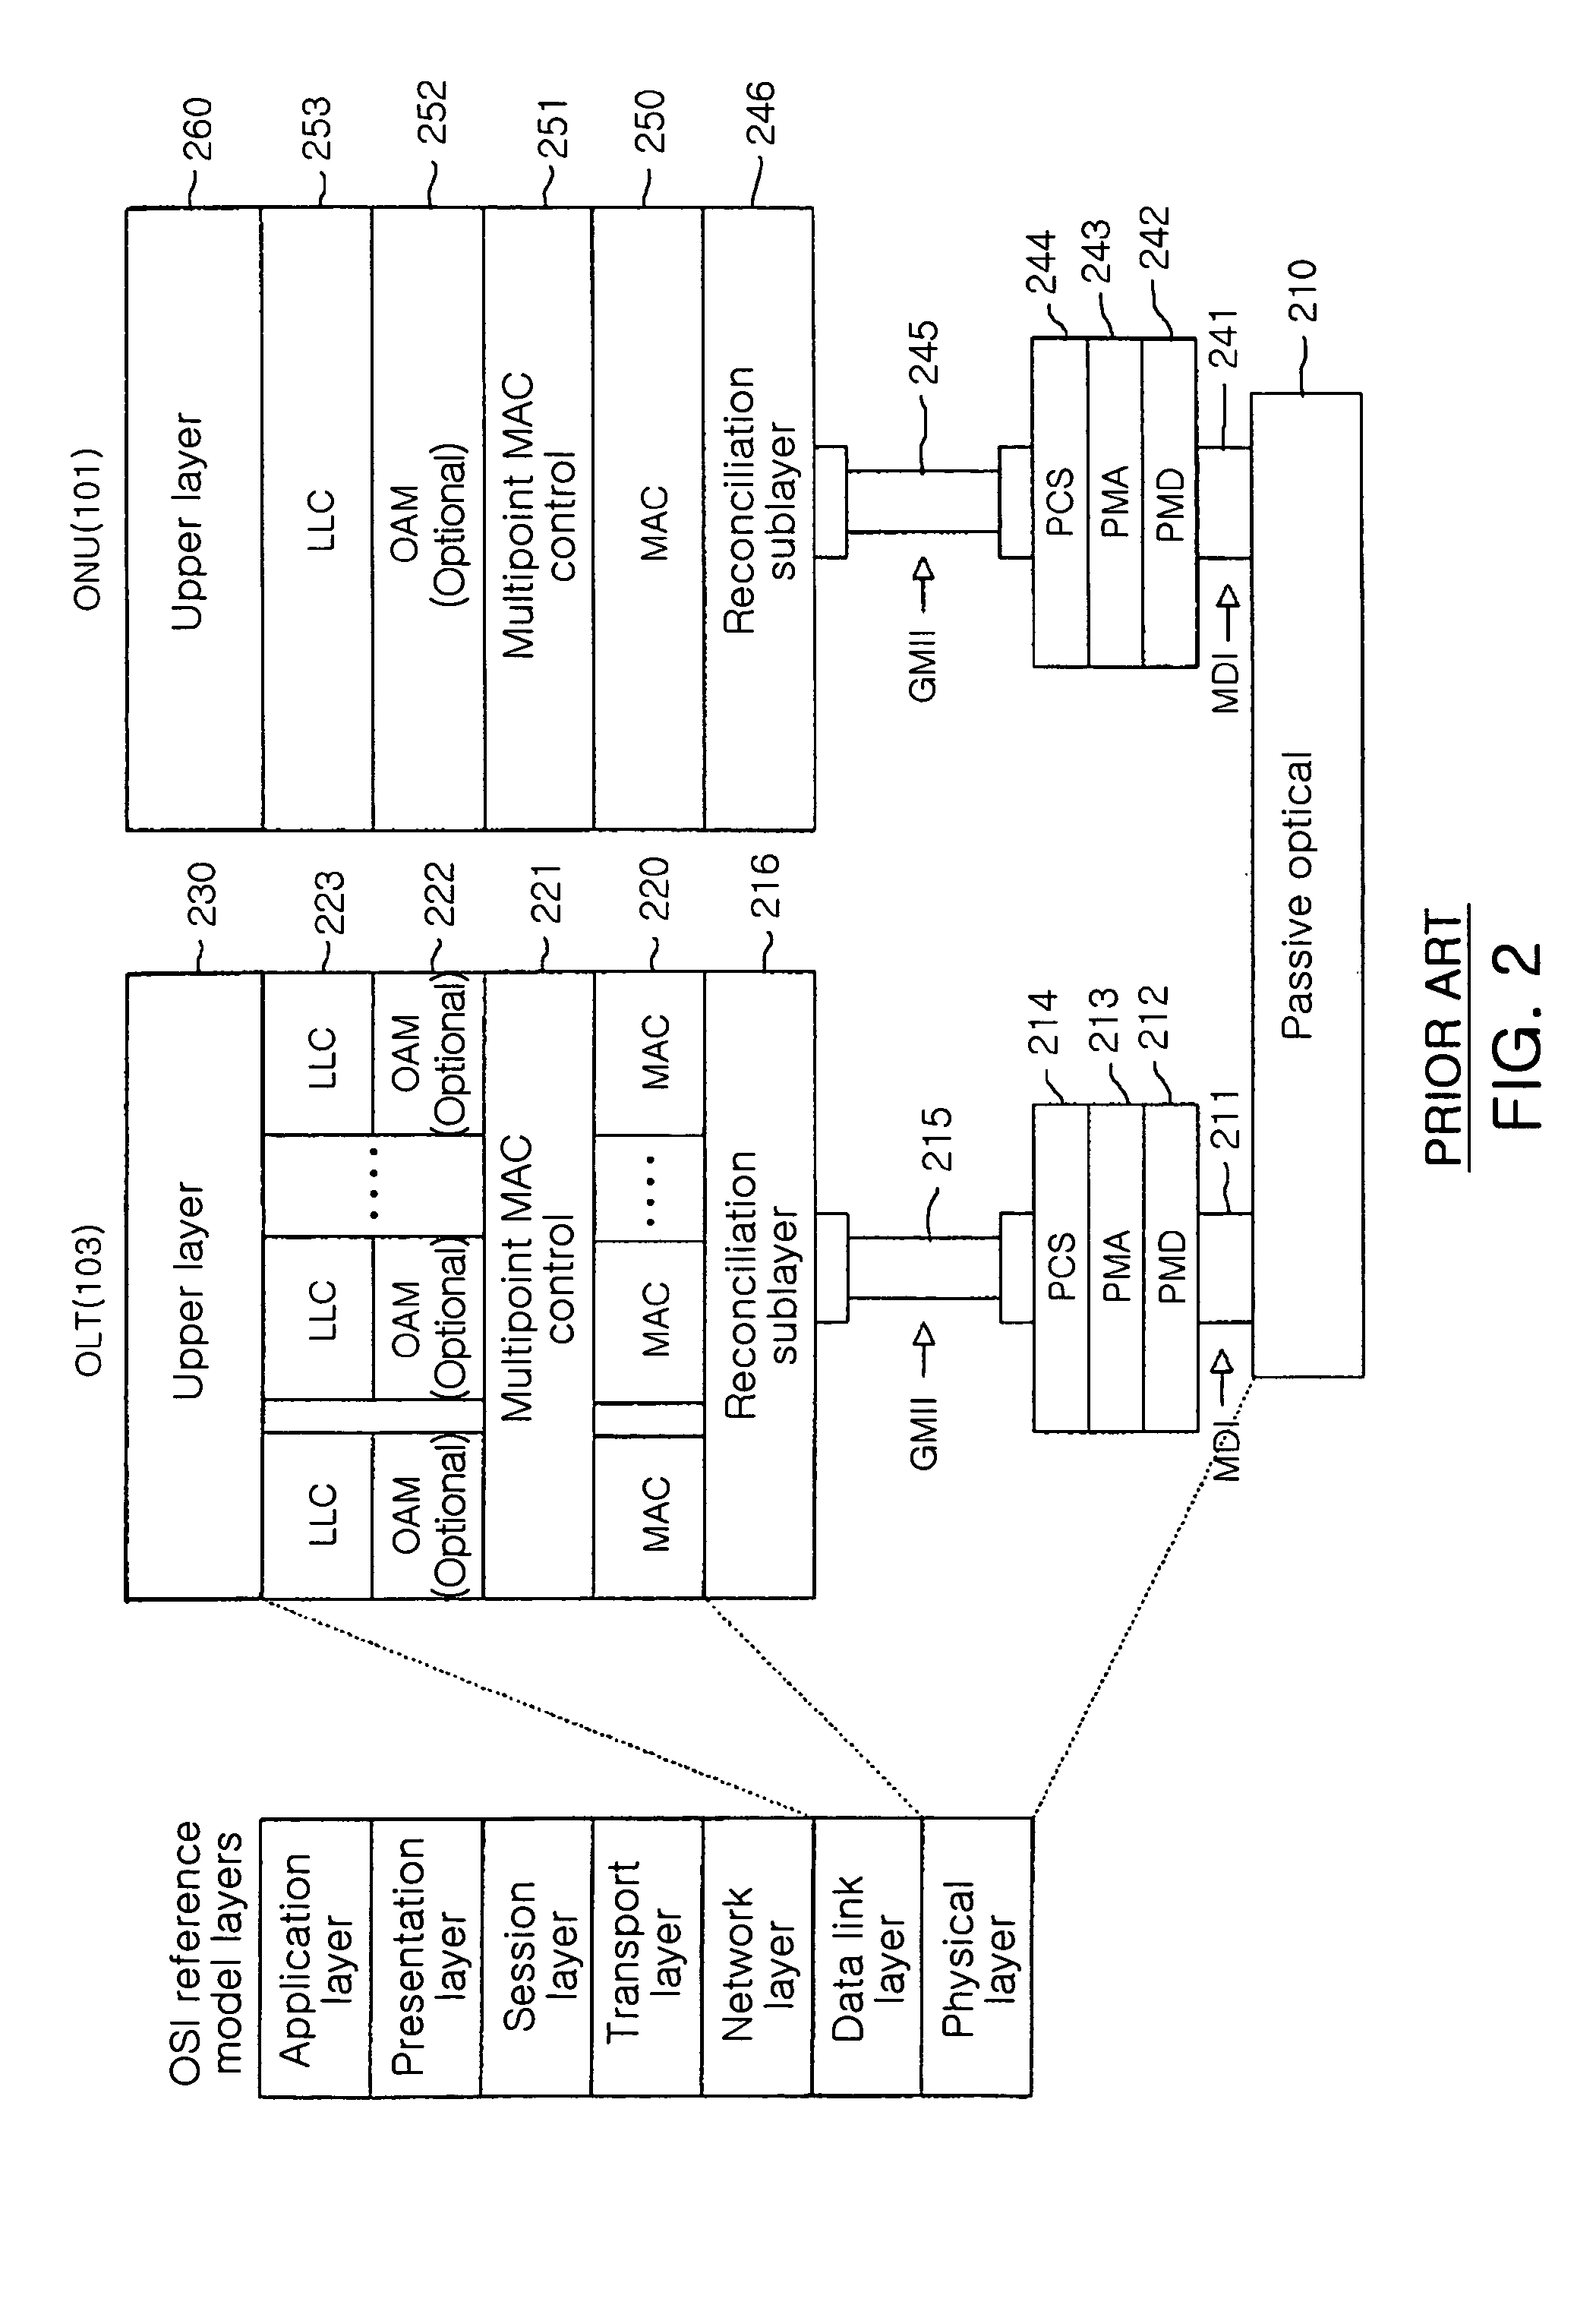 Shared LAN emulation method and apparatus having VLAN recognition and LLID management functions on EPON